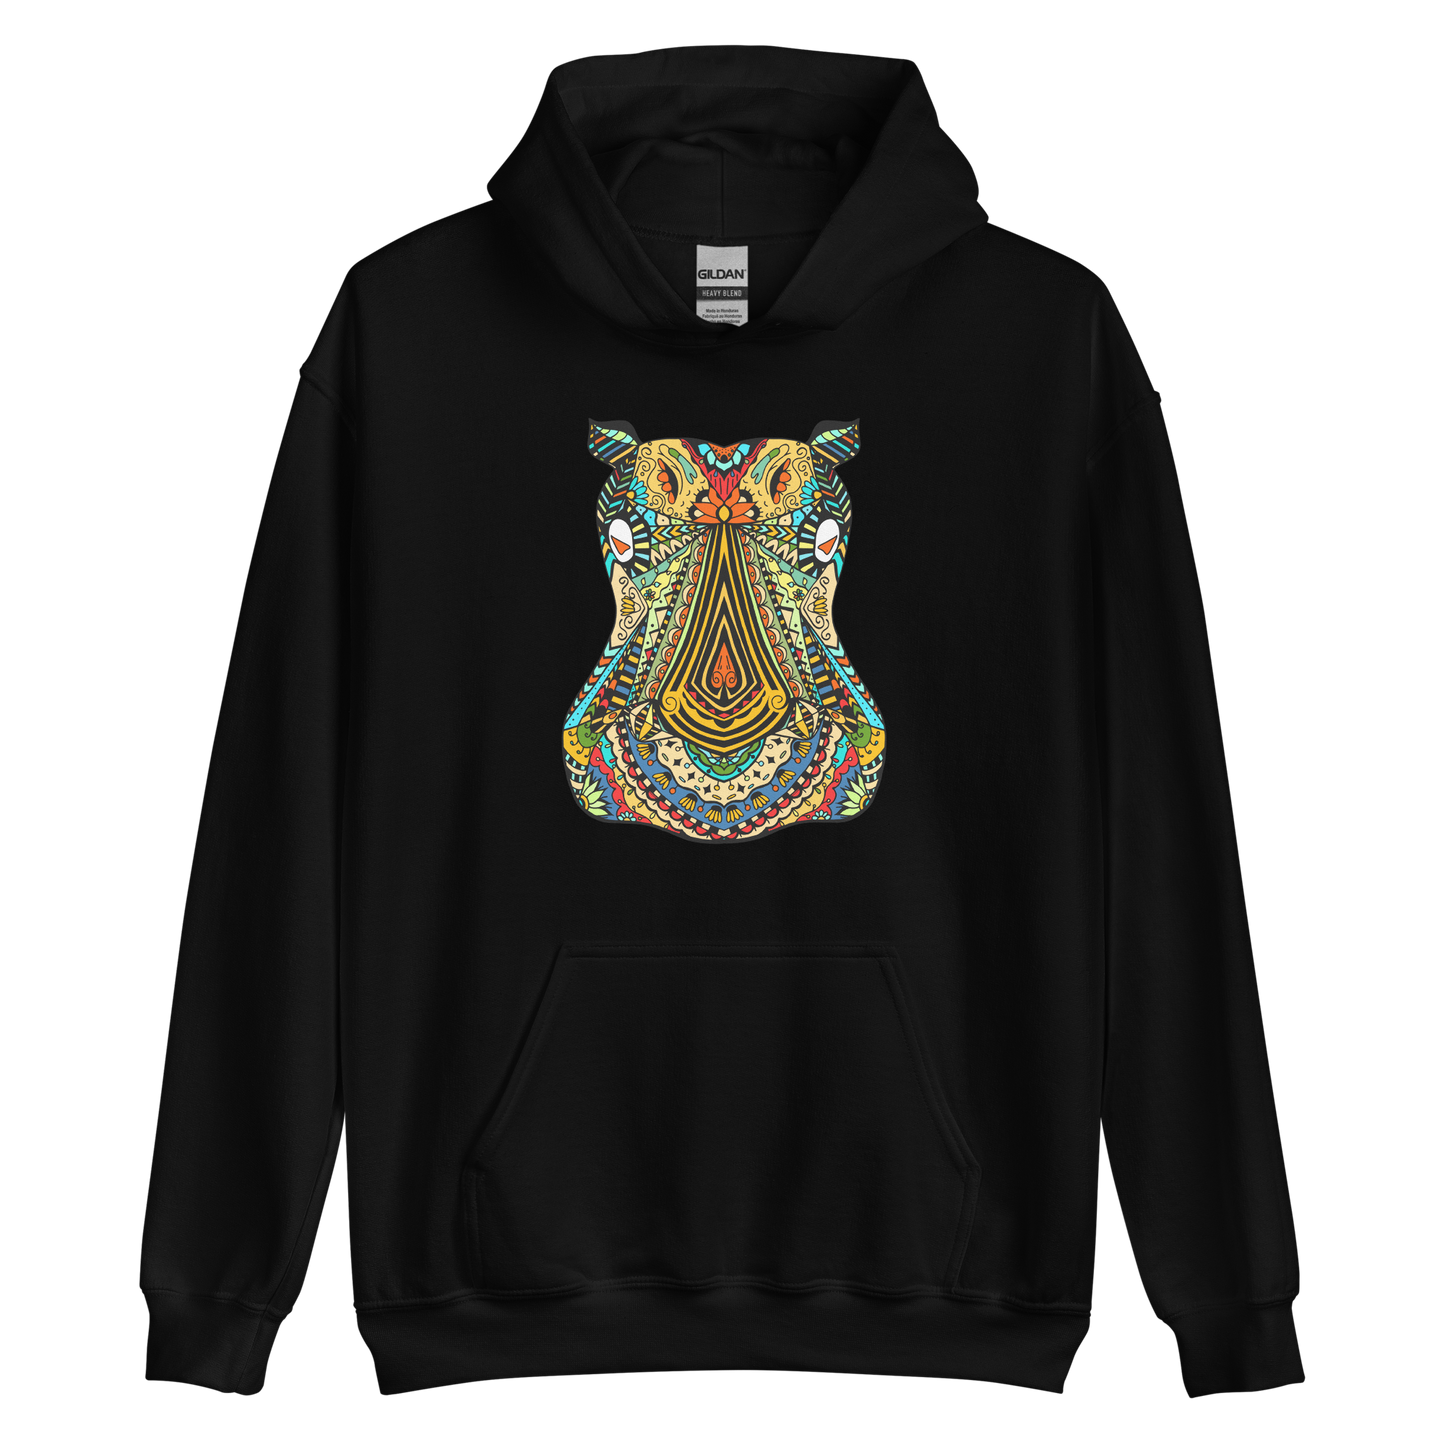 Black Hippo Hoodie featuring a captivating Zentangle Hippo graphic on the chest - Cool Graphic Hippo Hoodies - Boozy Fox